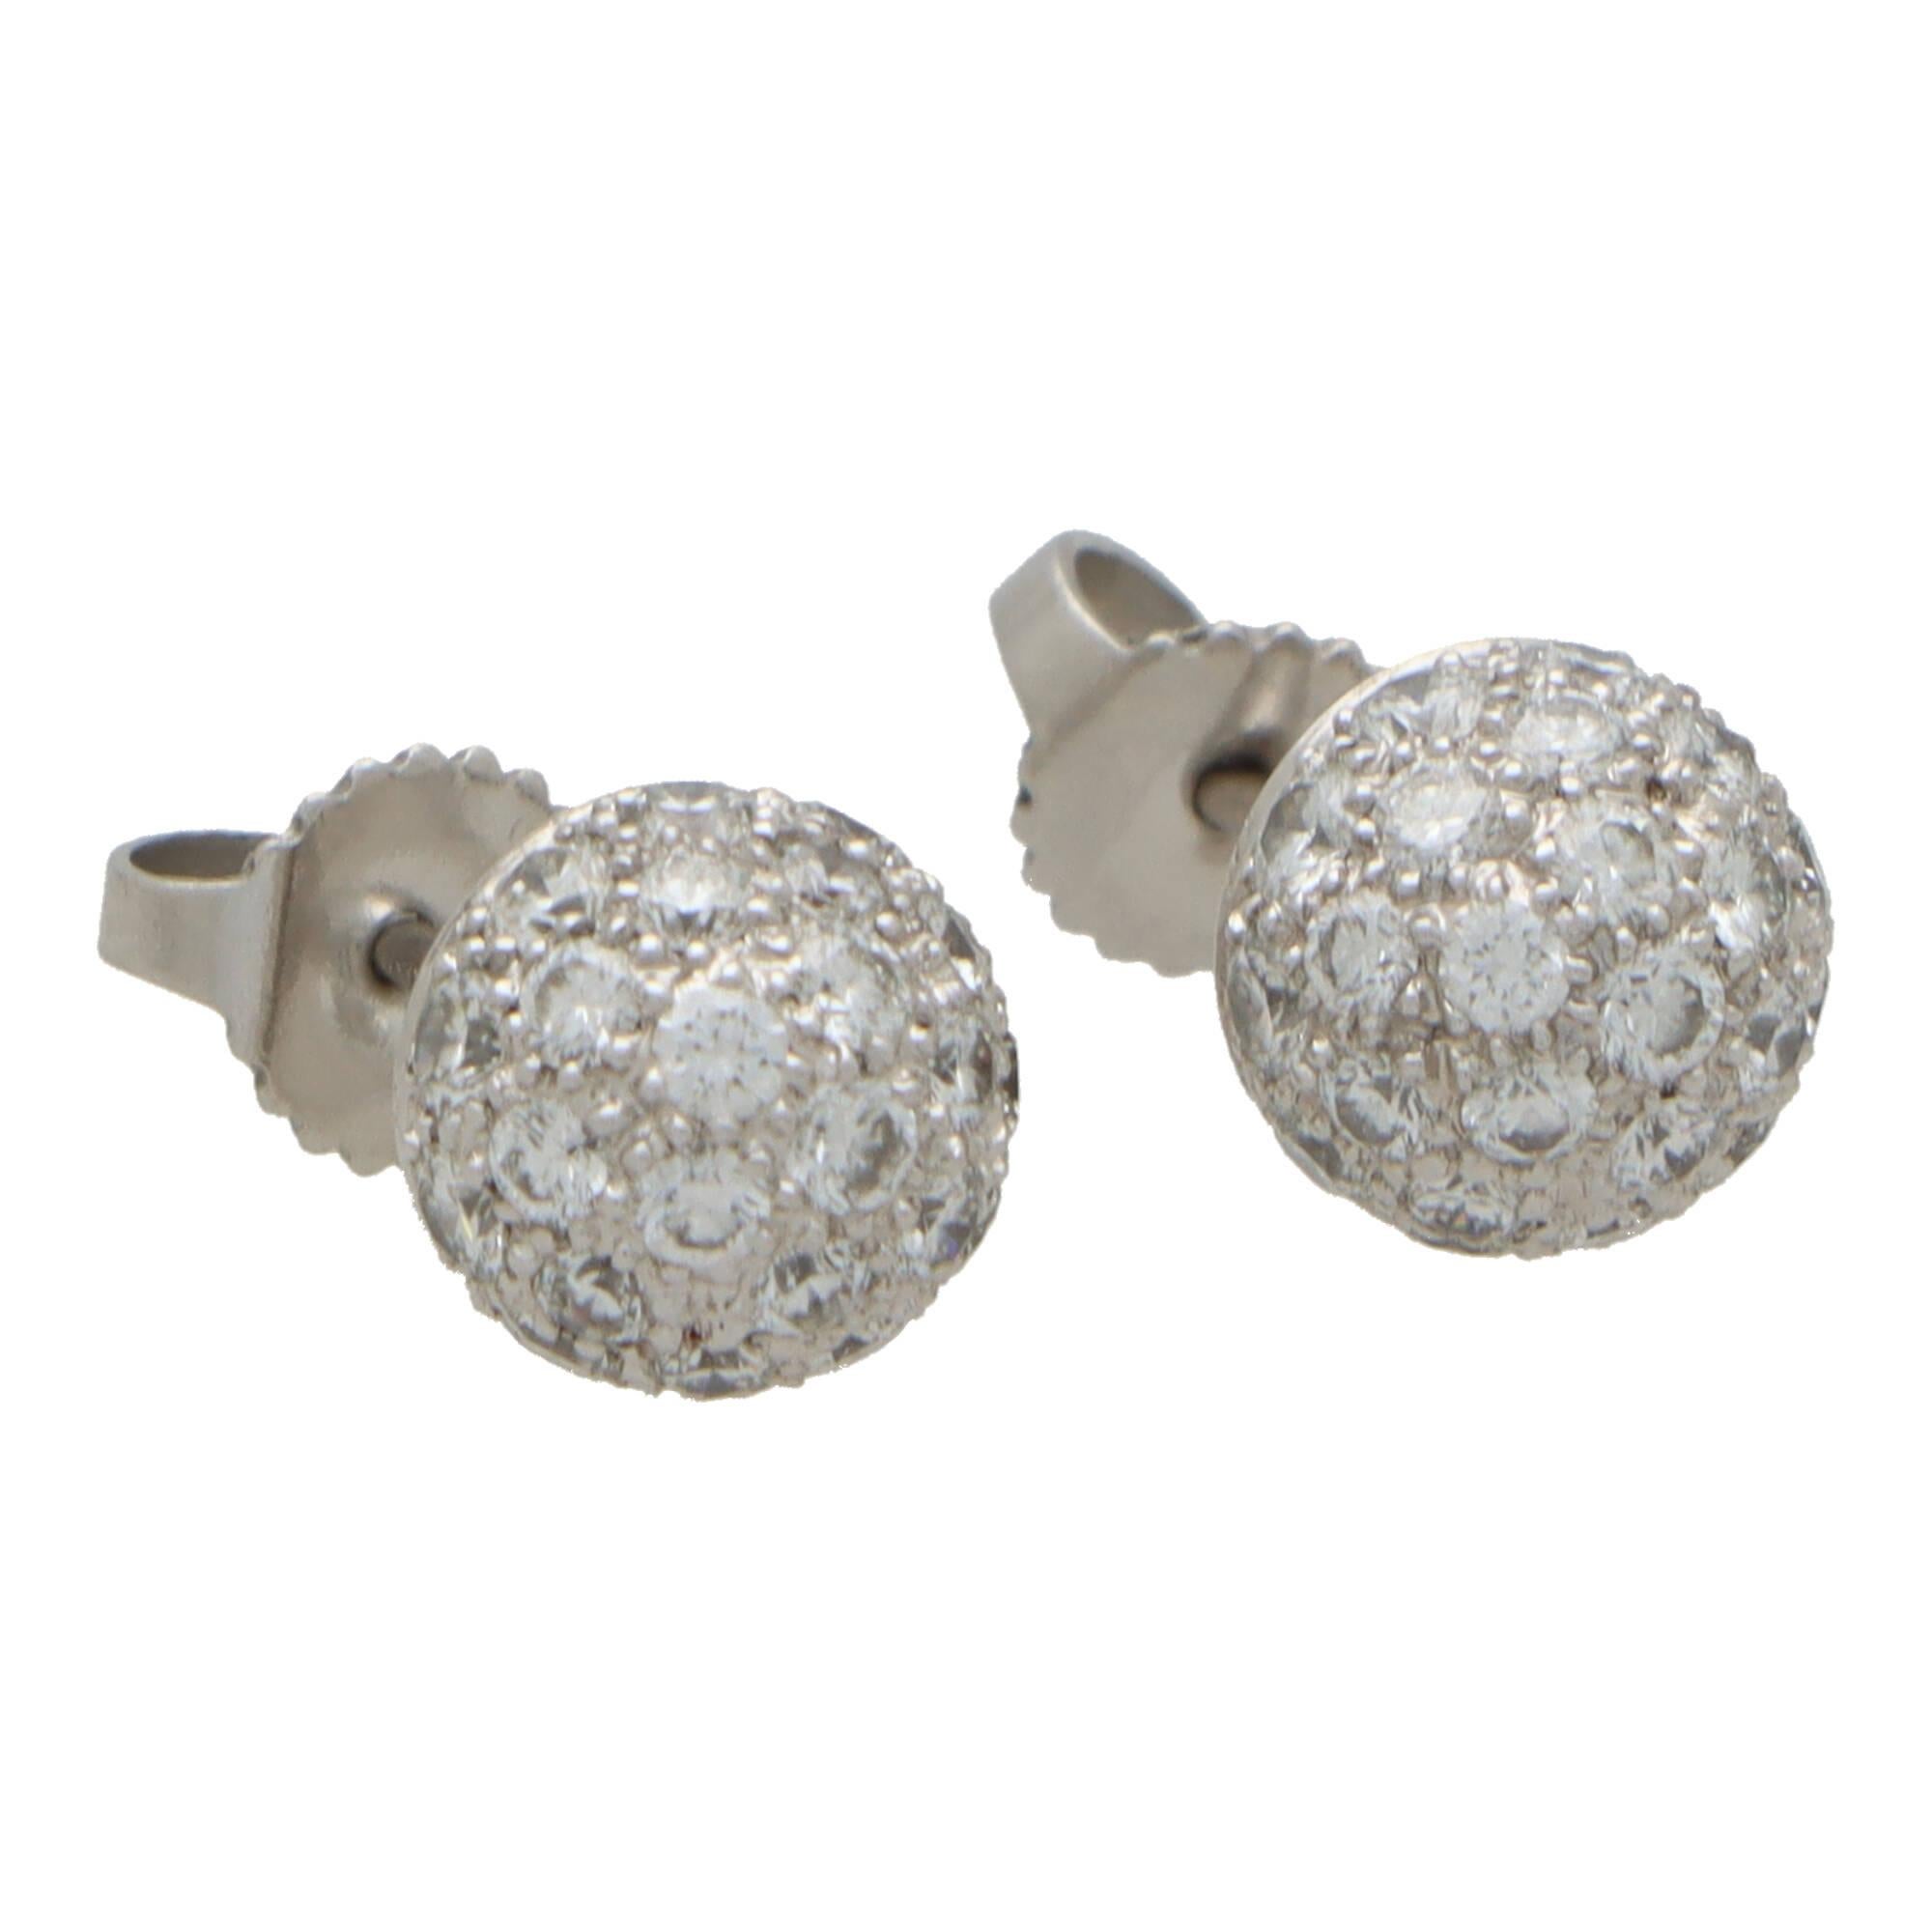 A beautiful pair of vintage Tiffany & Co. diamond ball stud earrings set in platinum.

From a discontinued design in the current Etoile collection, each earring features a platinum ball, completely pave set with 27 round brilliant cut diamonds. The